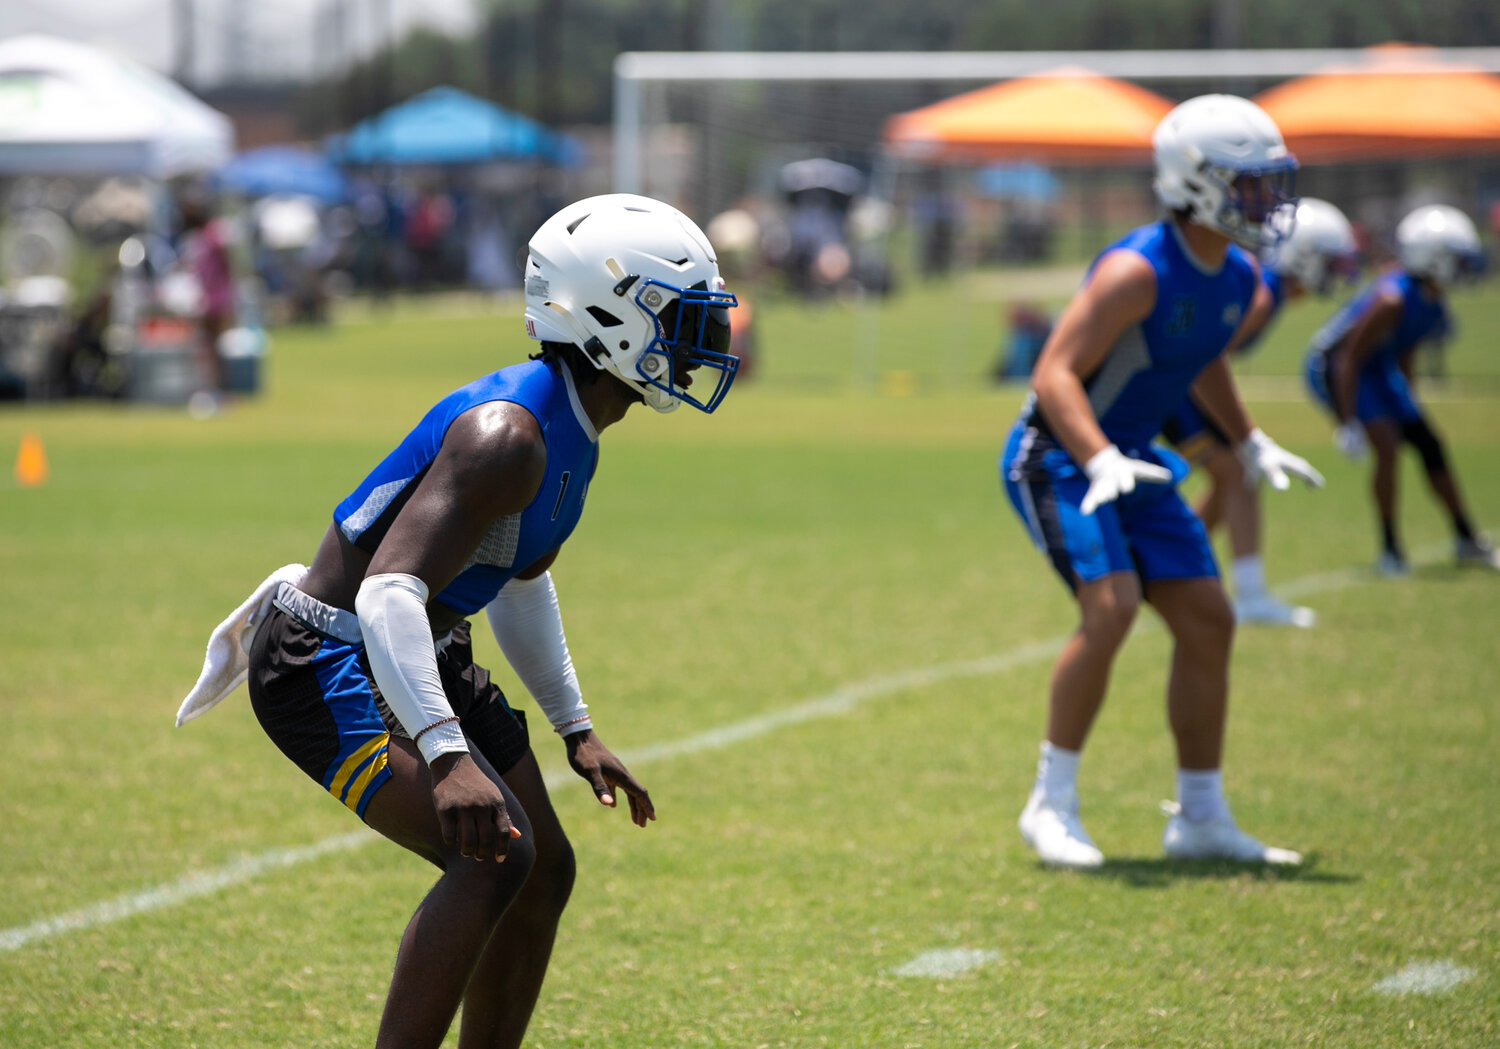 Fairhope senior Ameyr Adams readies for a play near the goal line in the second-round bracket contest between the Pirates and host Foley Lions at the 7-on-7 Showdown hosted by Foley Sports Tourism.